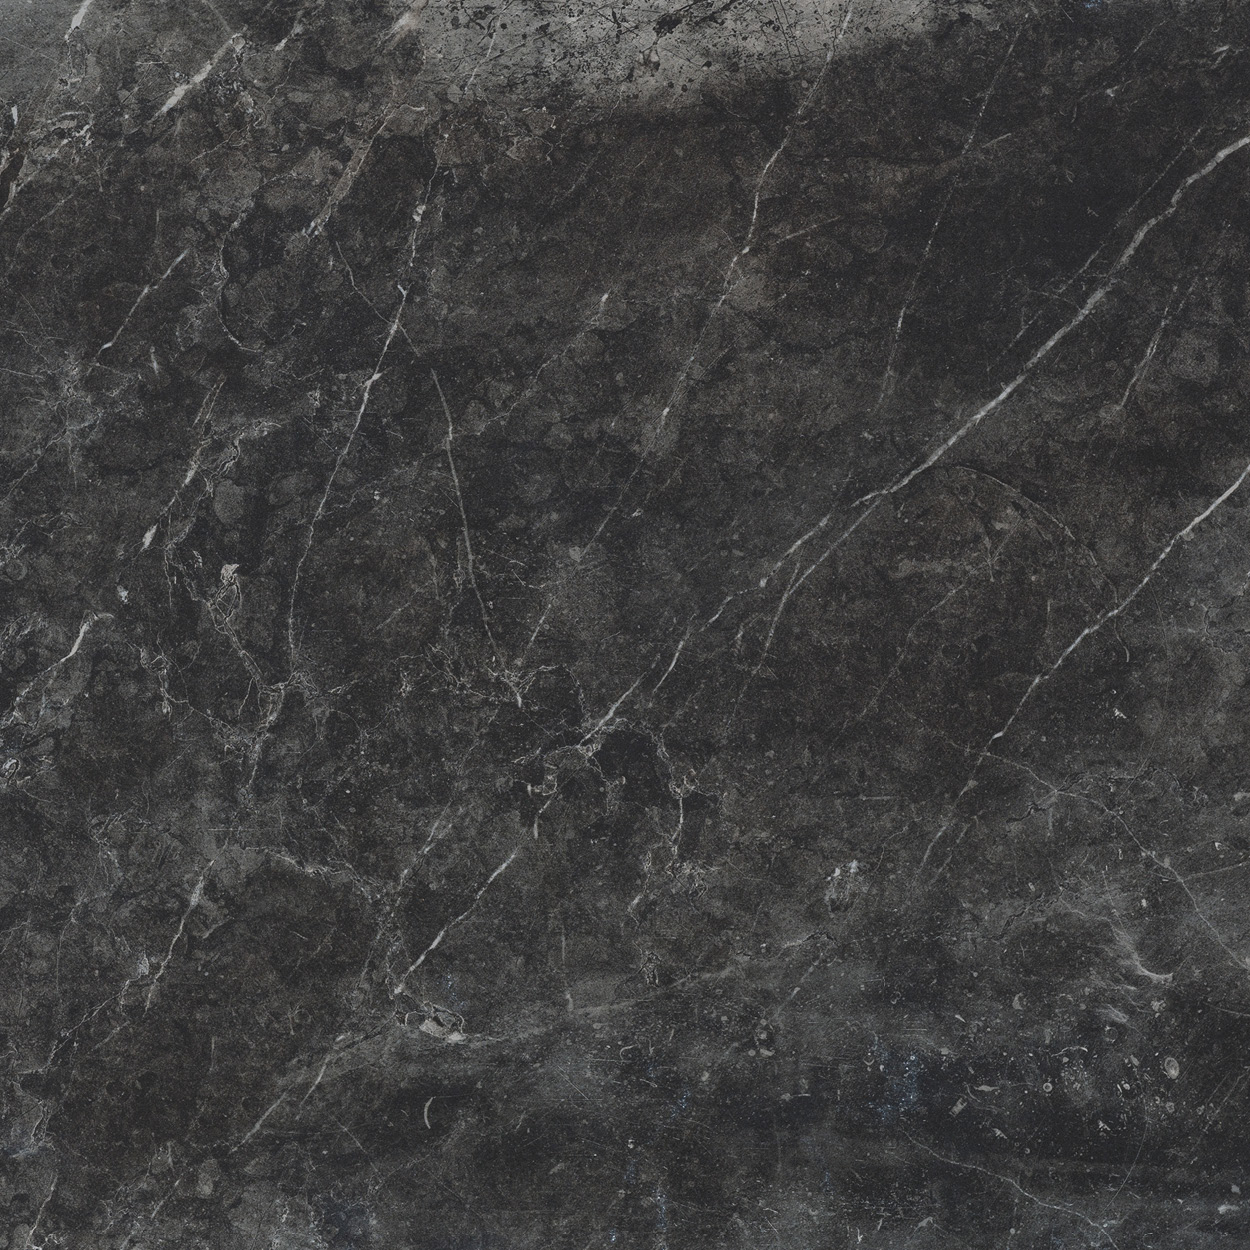 32 X 32 Evo Stone Graphite Honed finished Rectified Porcelain Tile (SPECIAL ORDER ONLY)